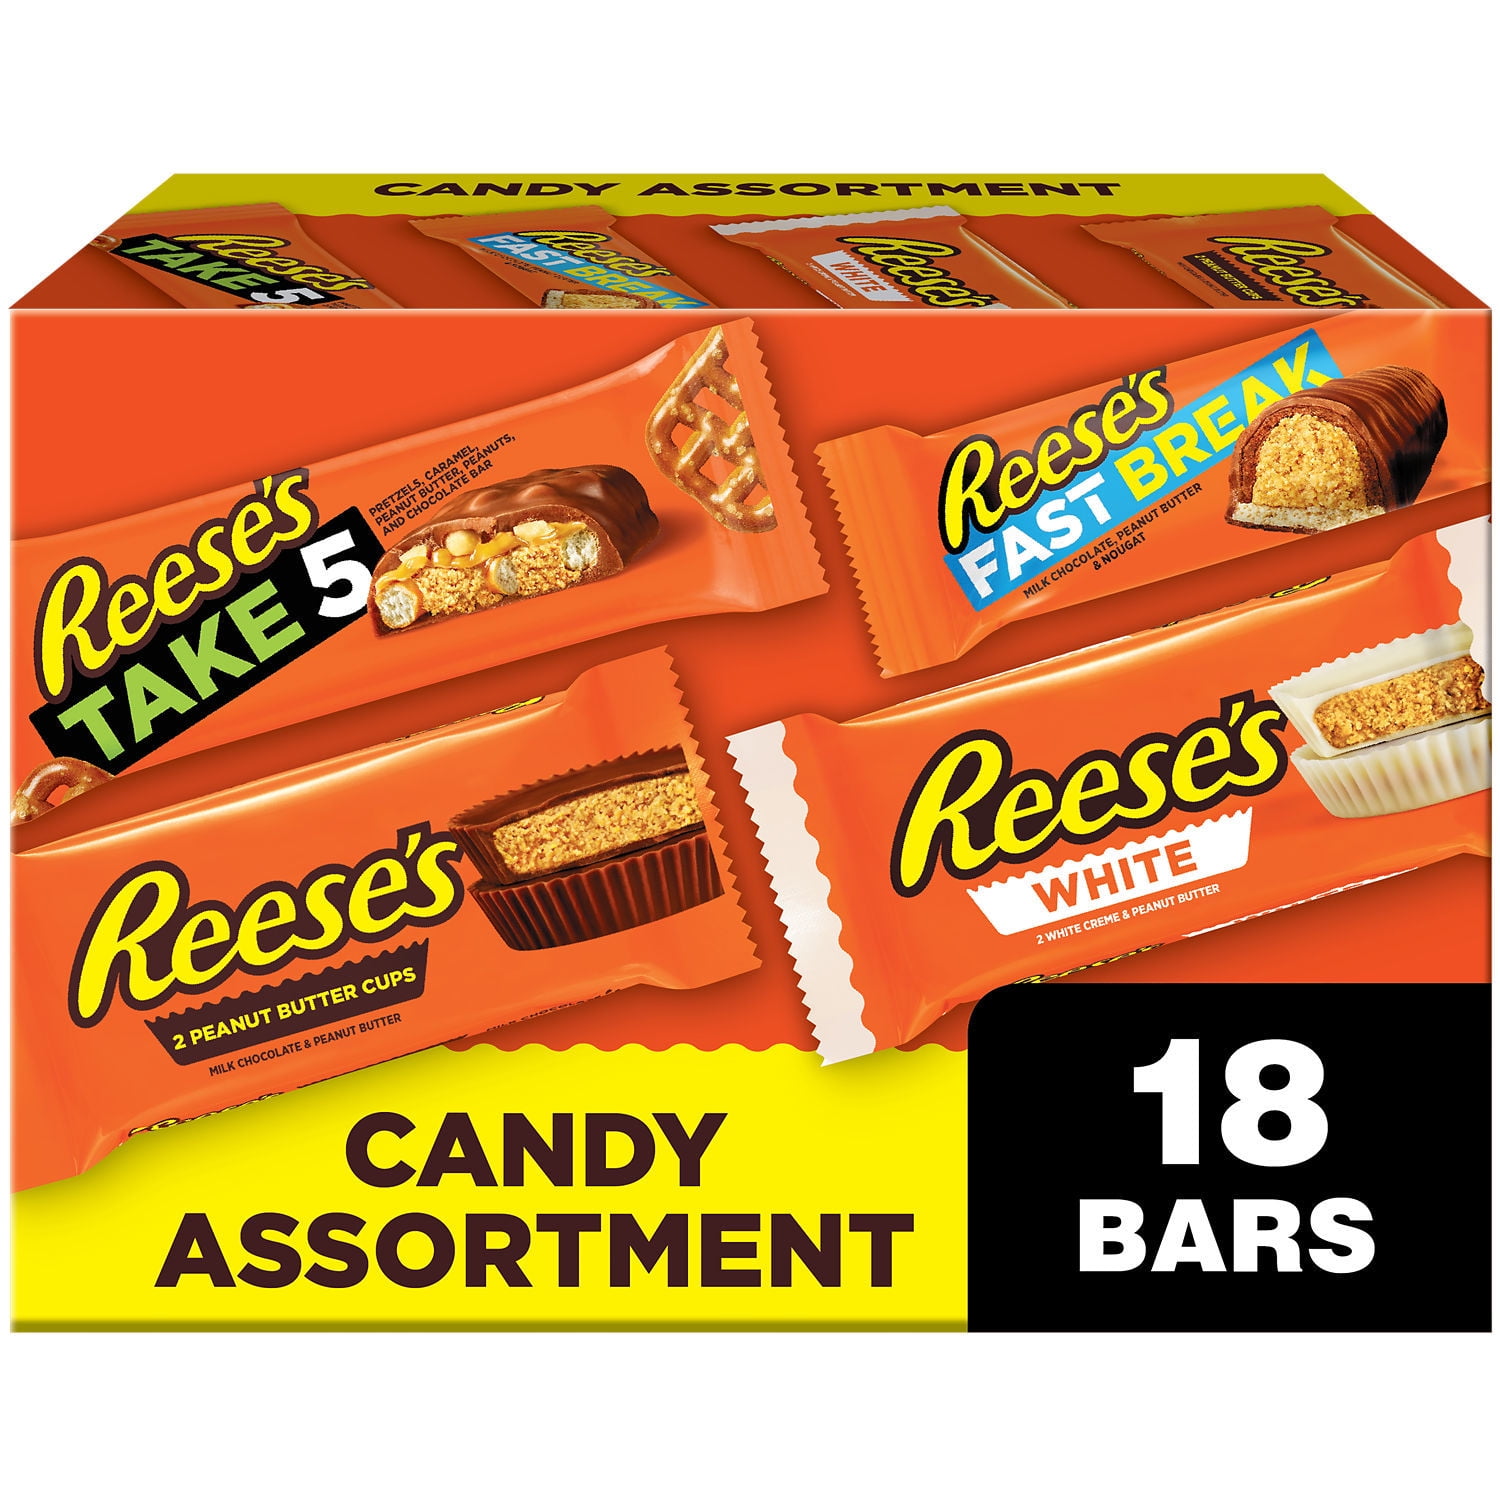 Hershey's, Kit Kat & Reese's Full Size Chocolate Candy Bars Variety Pack,  30 pk./45 oz.